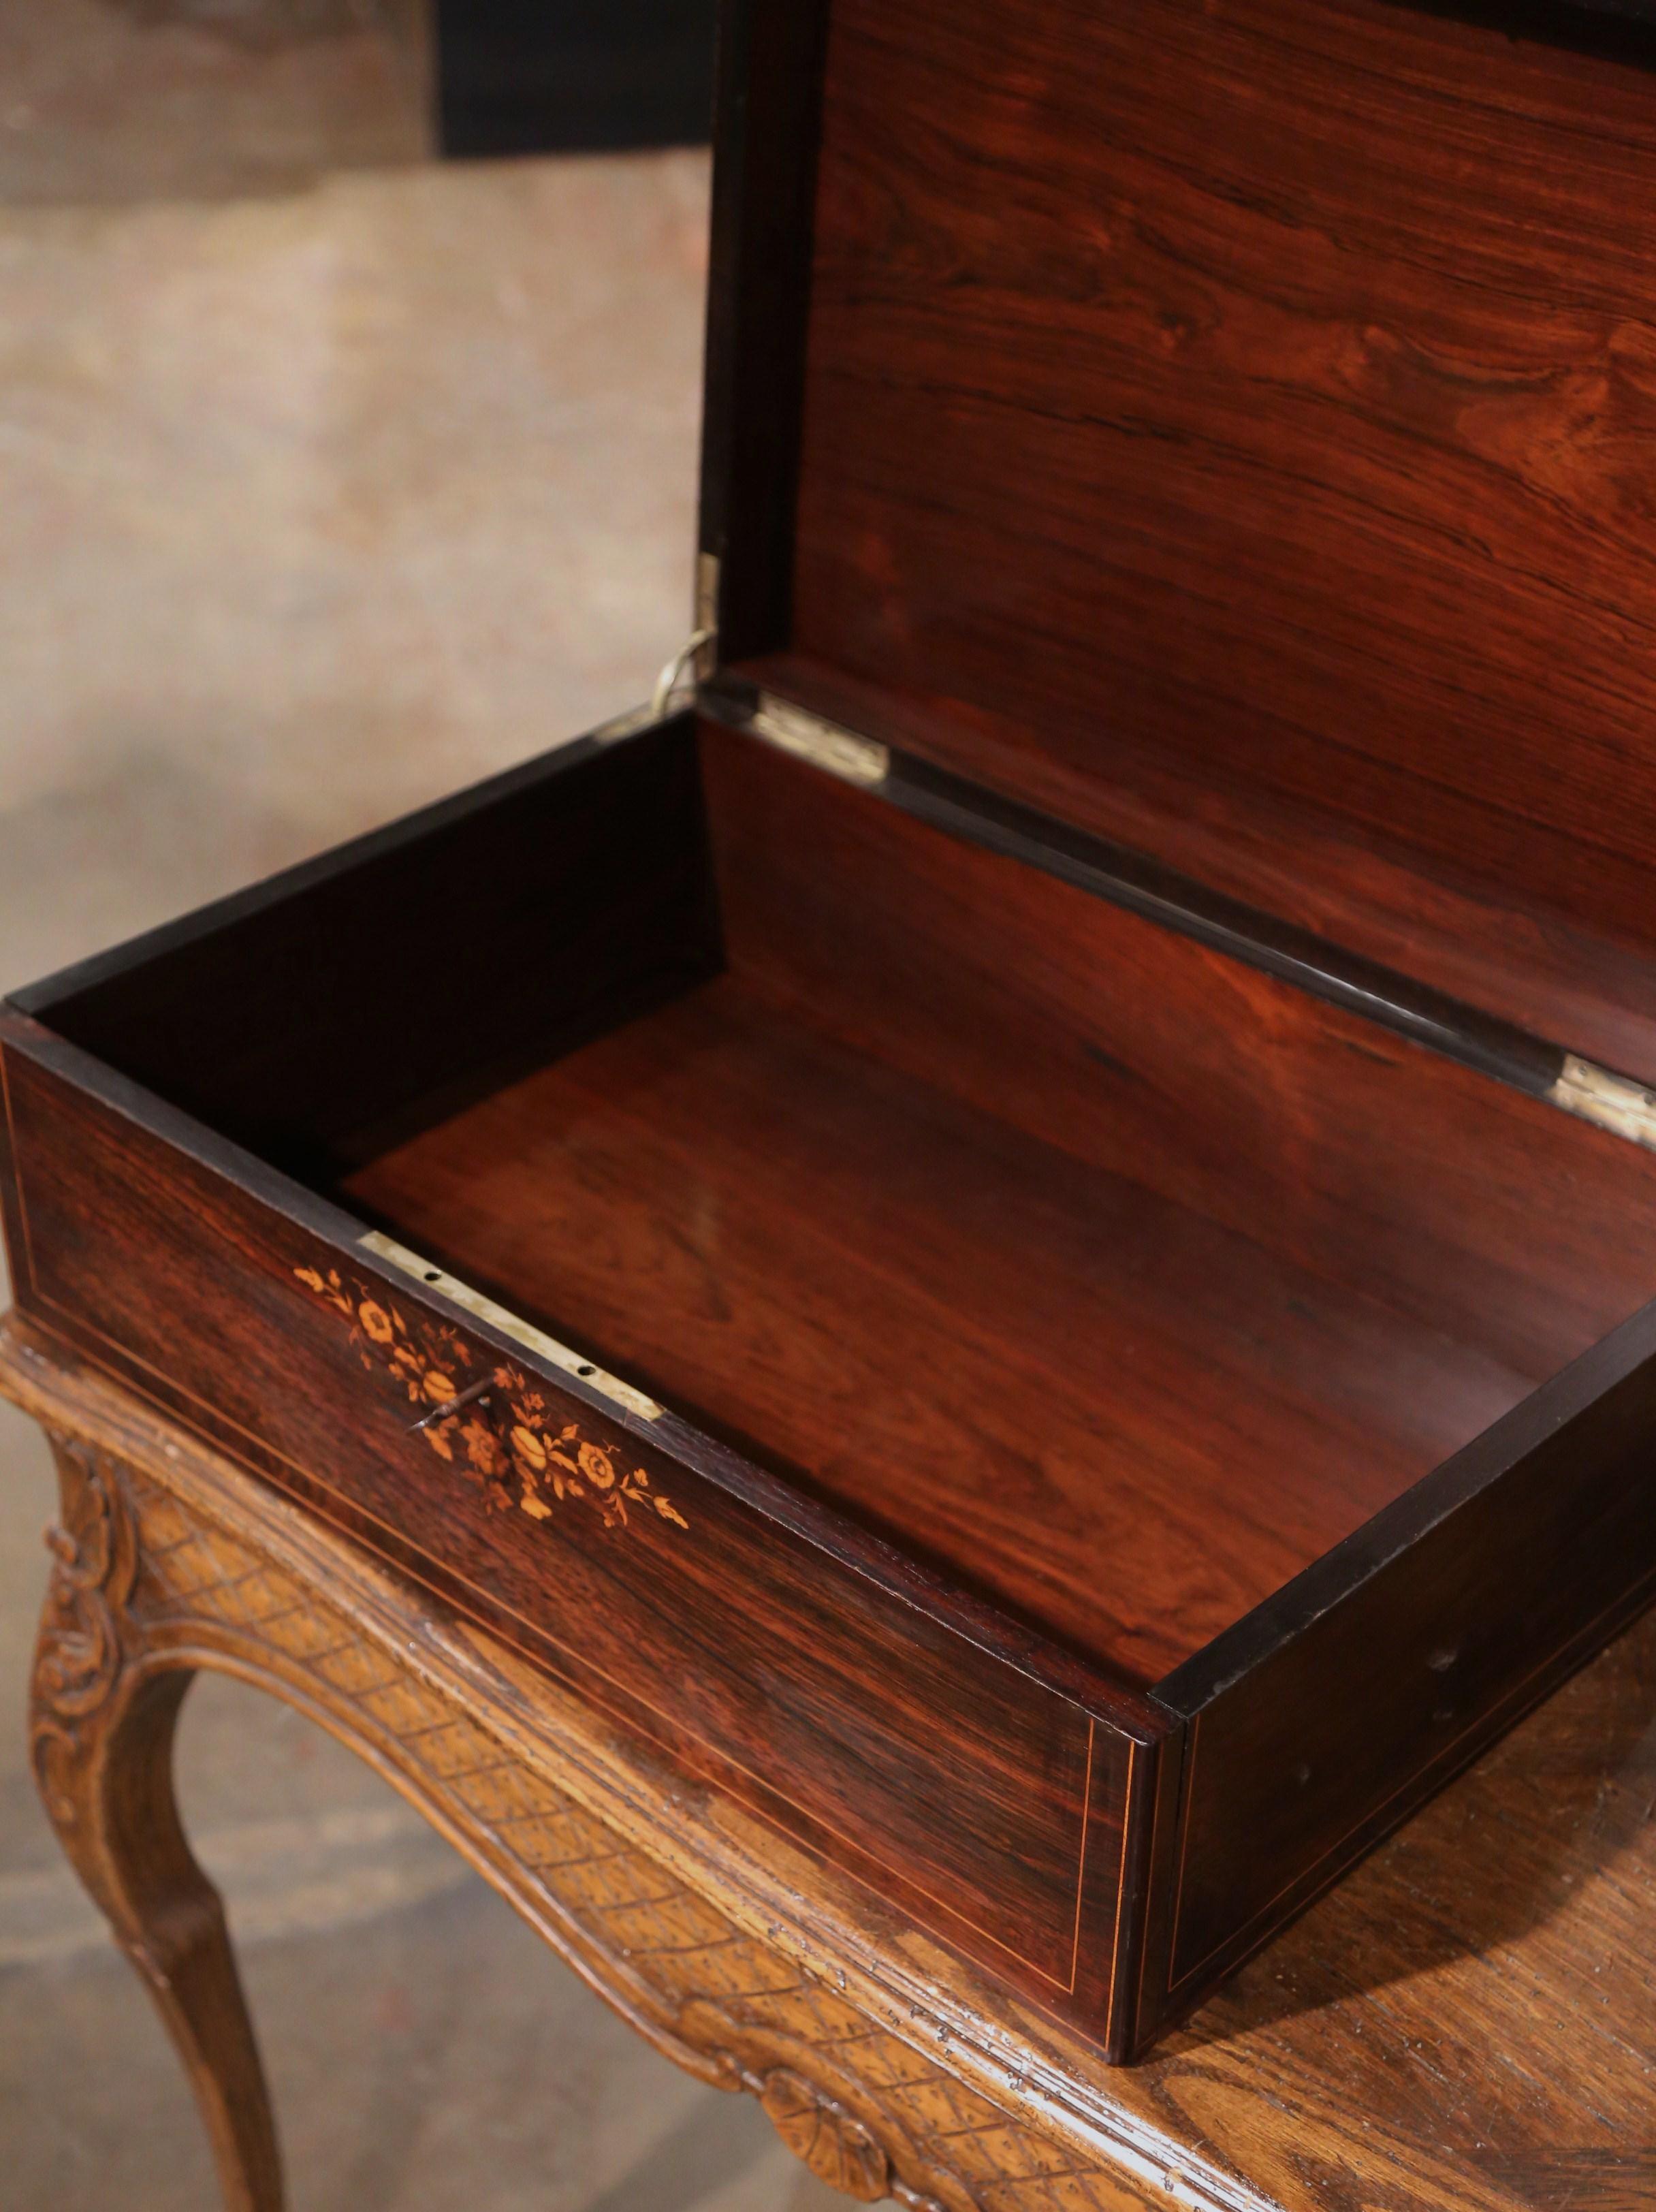 19th Century French Napoleon III Floral Inlaid Rosewood Decorative Jewelry Box For Sale 4